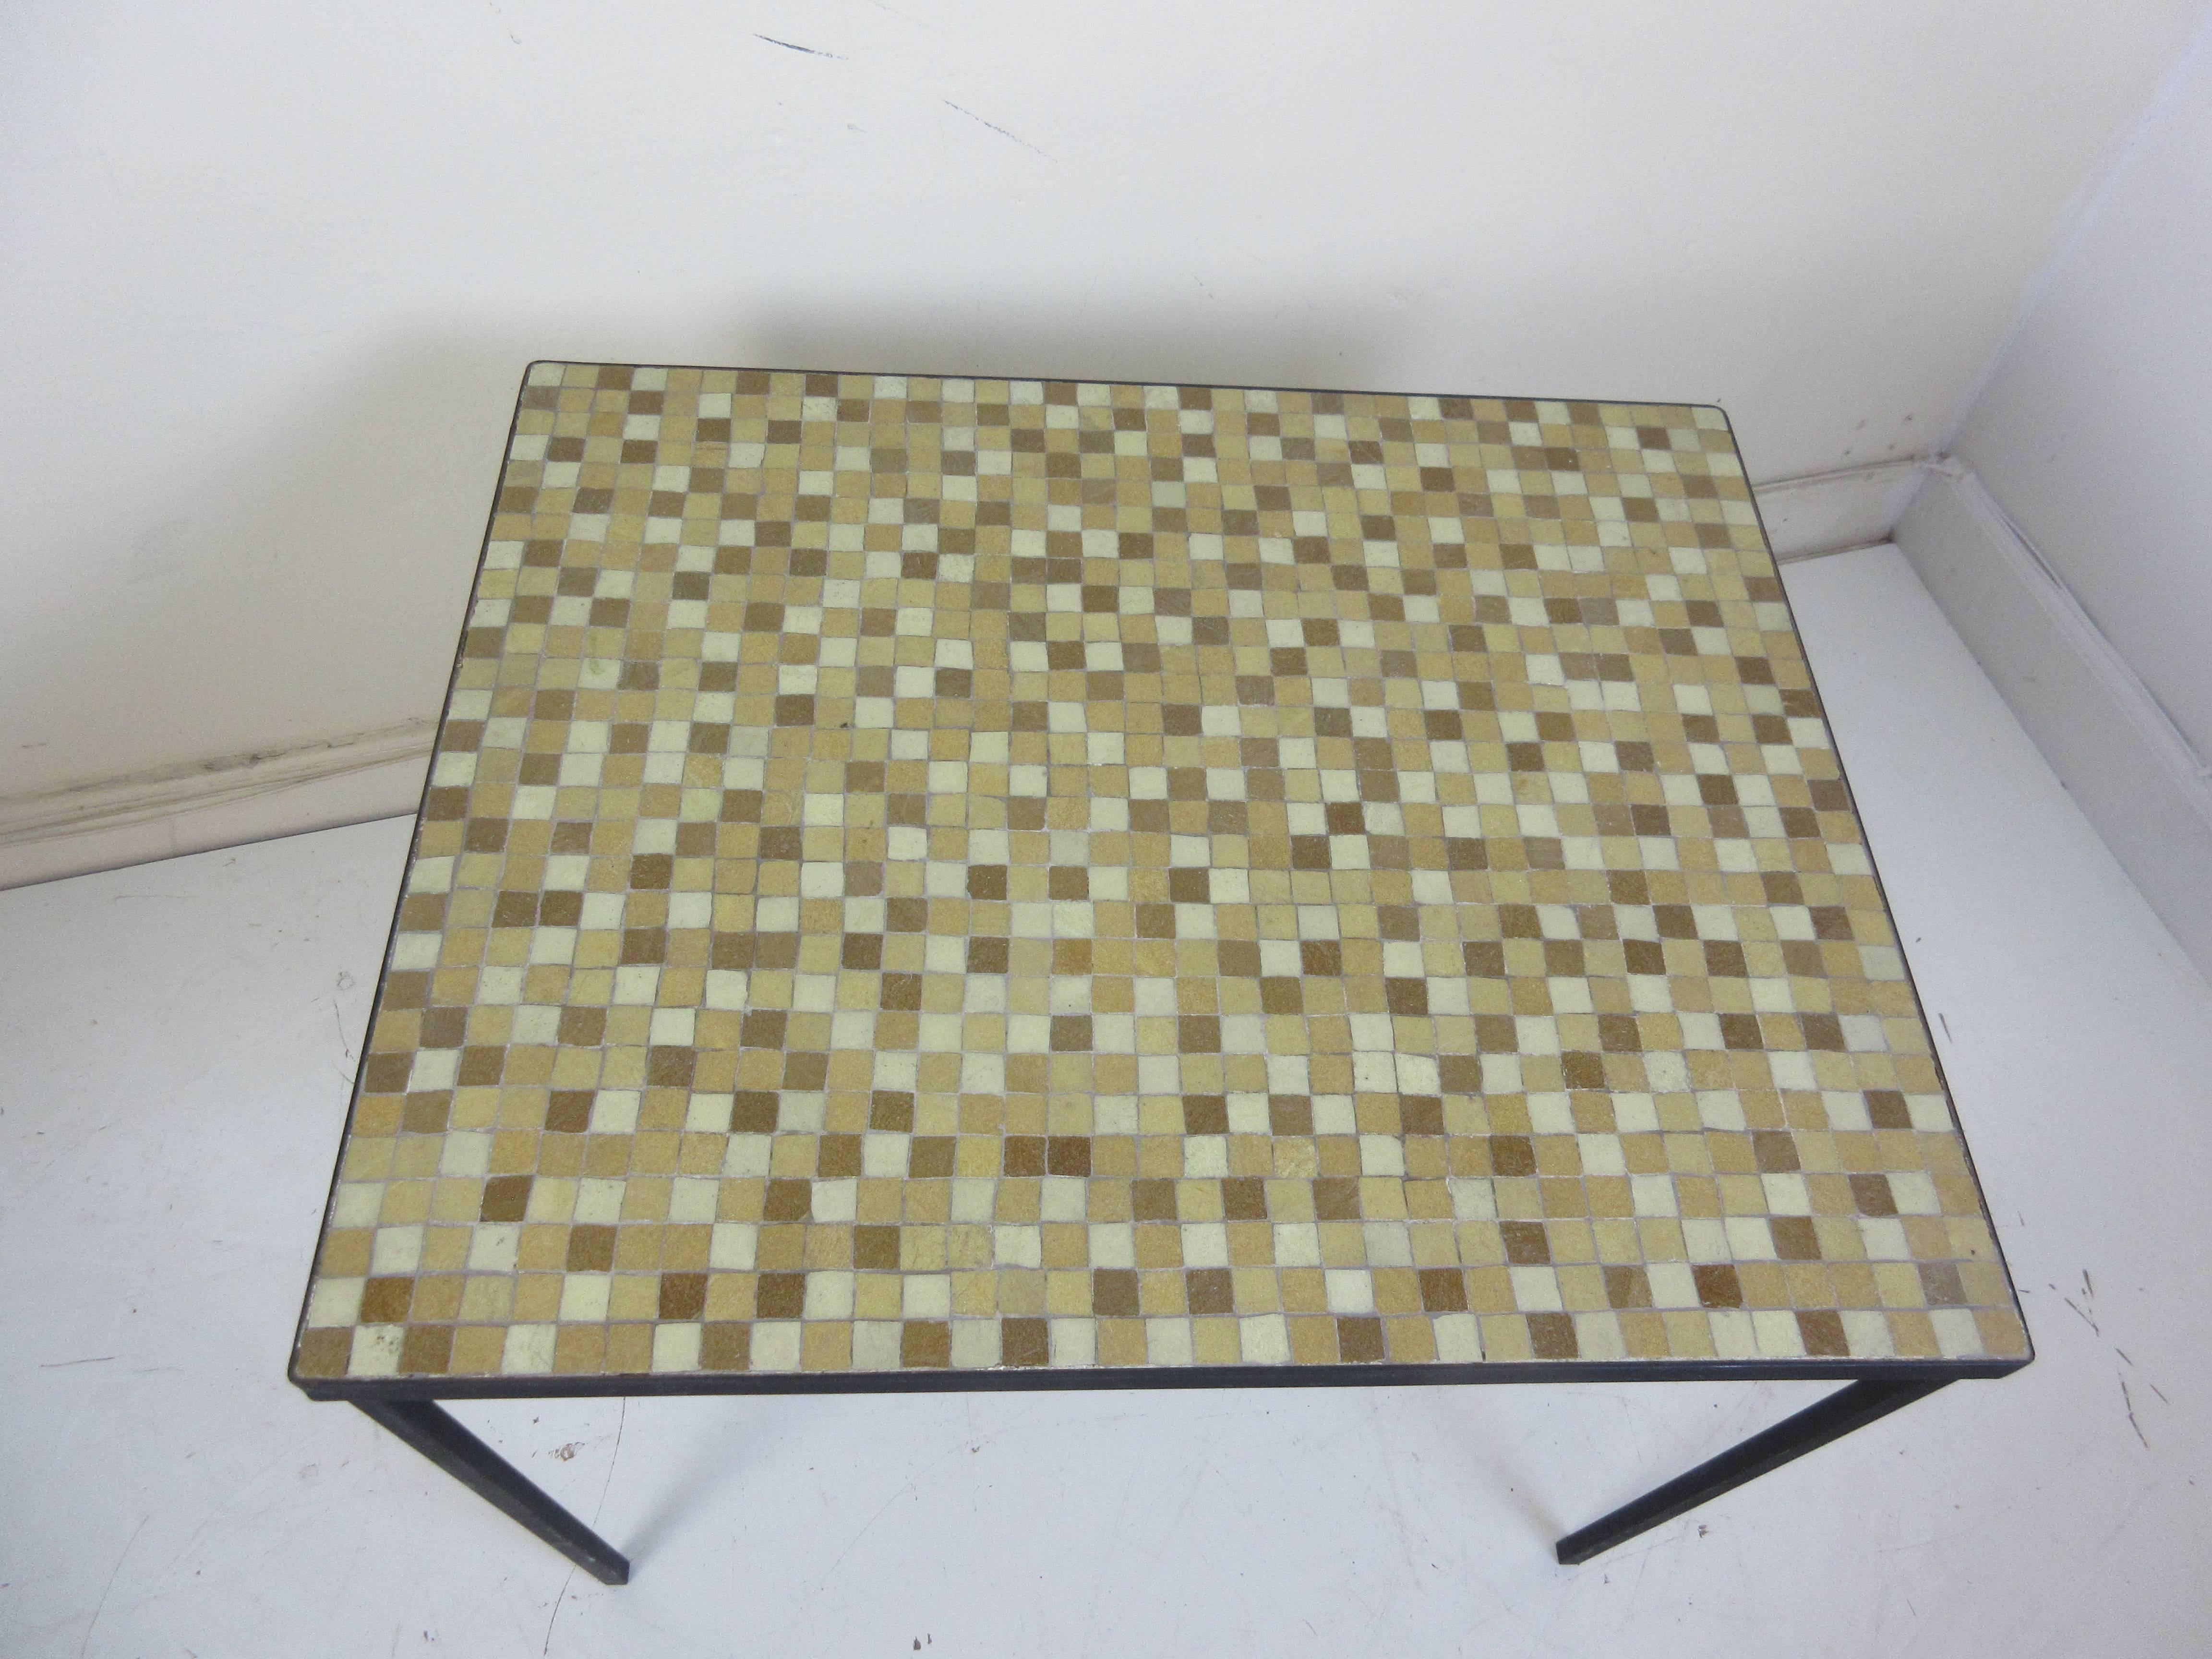 Paul McCobb tile top wrought iron side or lamp table with glass tiles in shades of tan, off-white and brown.